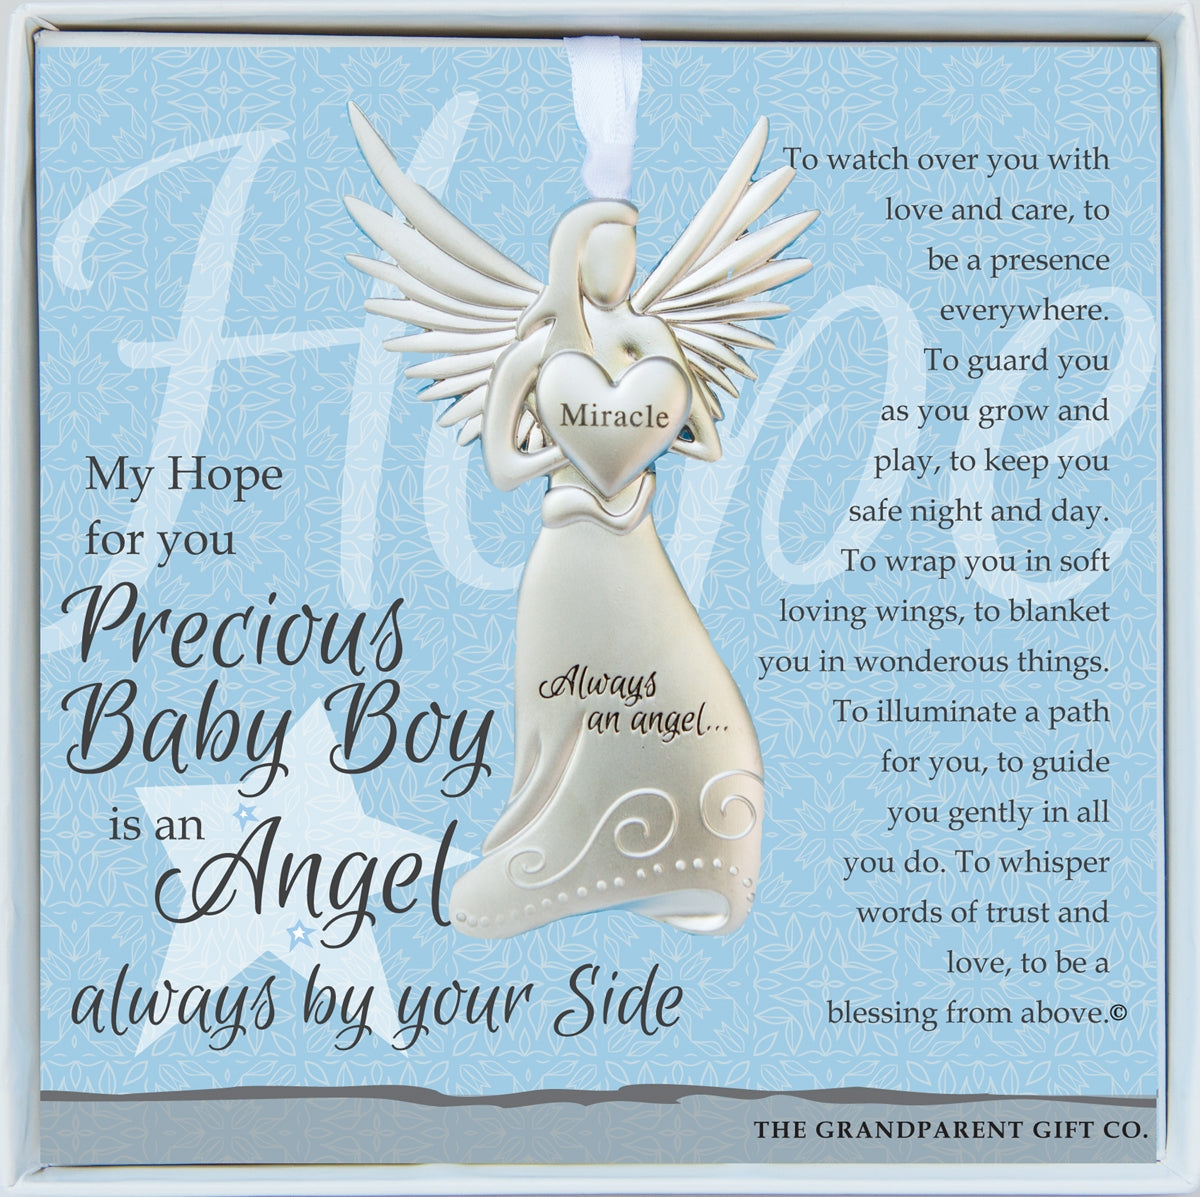 Baby Boy Gift- 4" metal miracle angel ornament with "Precious Baby Boy" poem in white box with clear lid